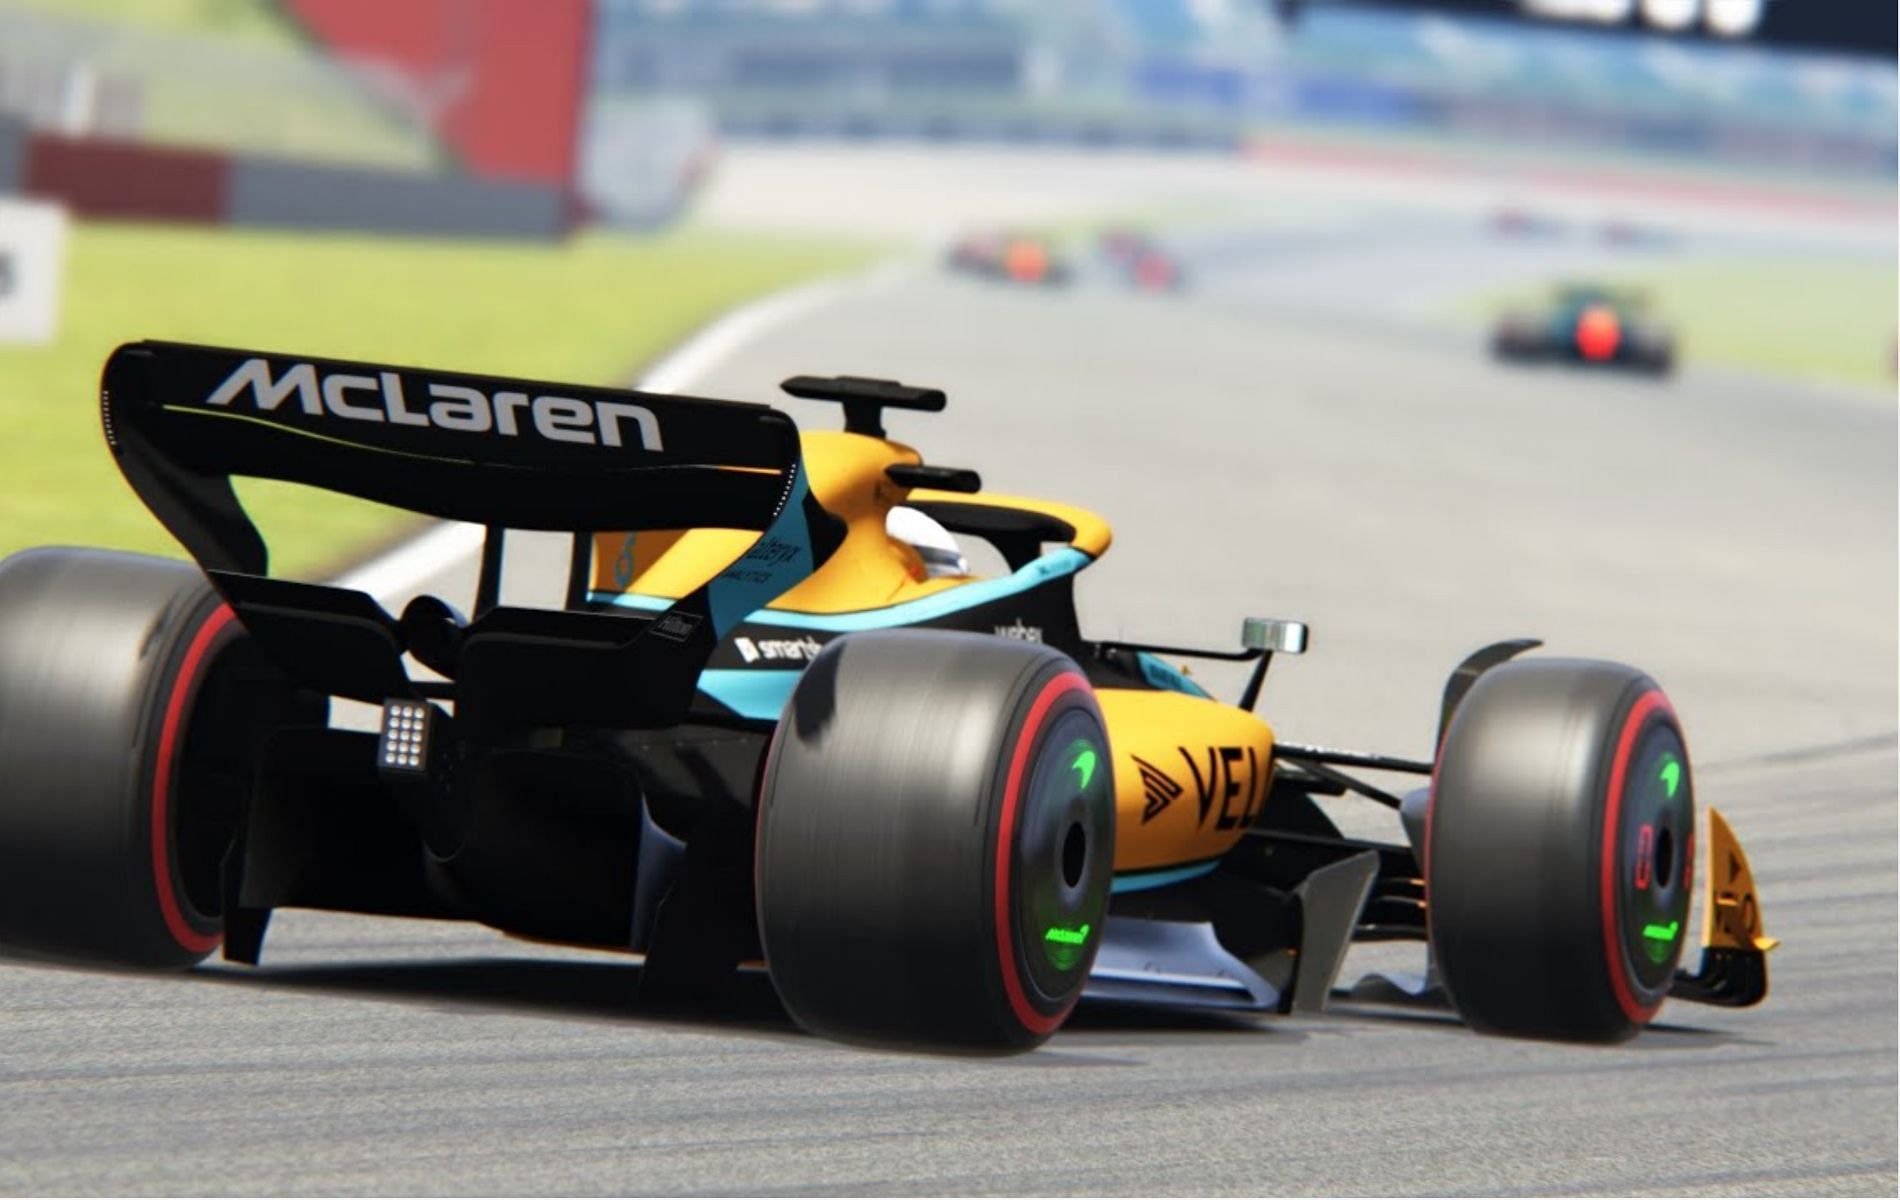 F1® 22 PC System Requirements - Electronic Arts